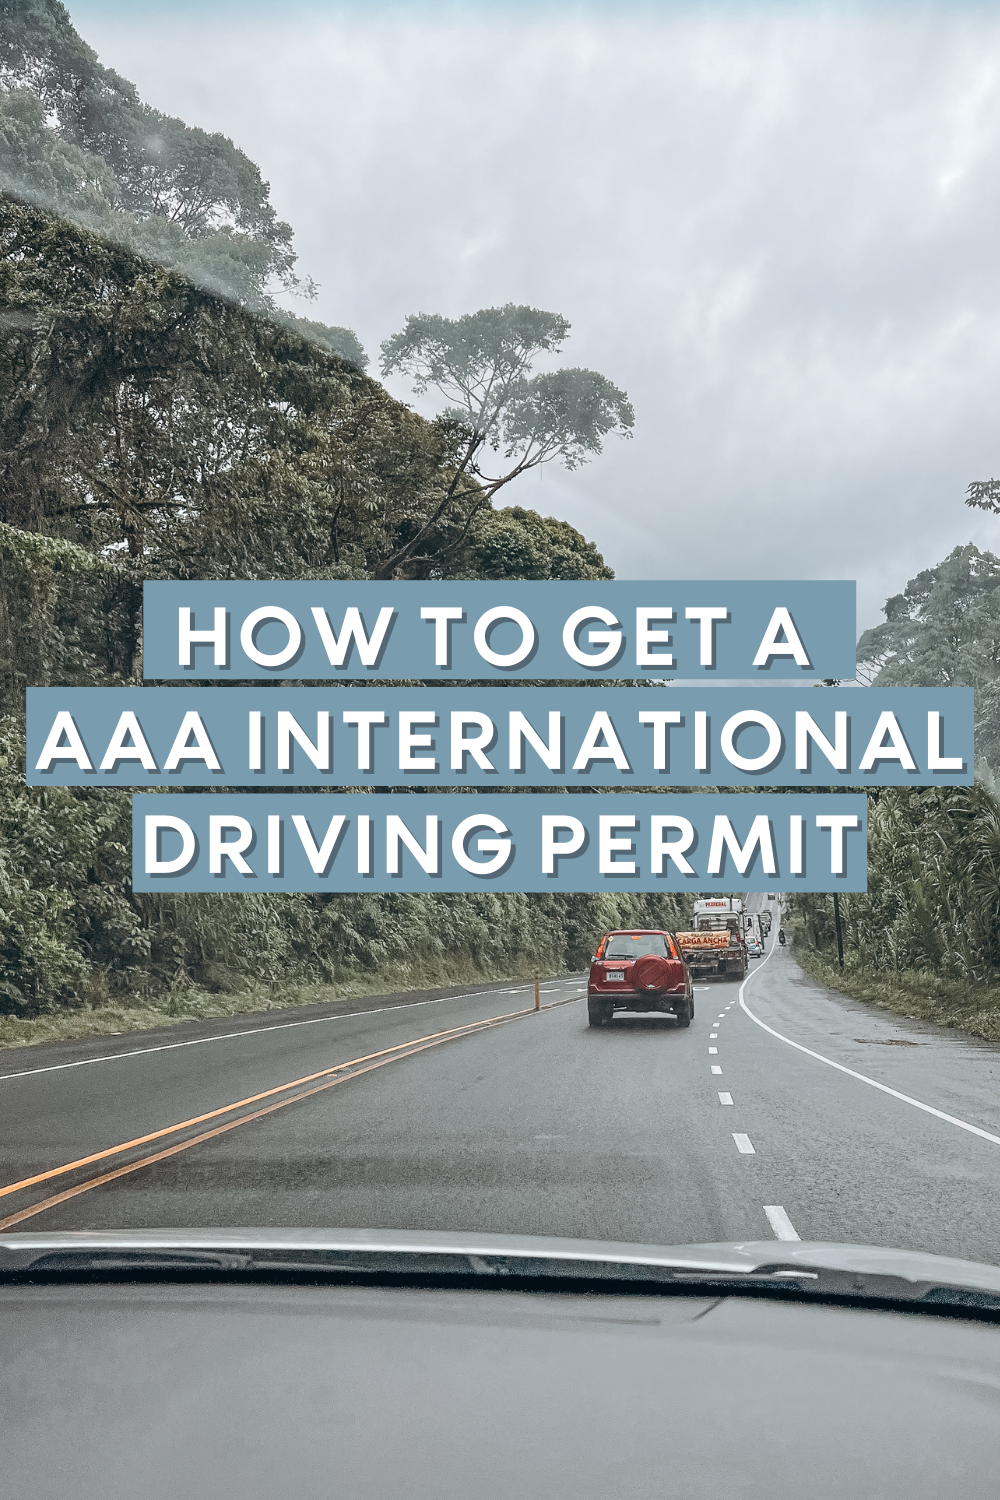 How to get a international driving permit - AAA international driving permit